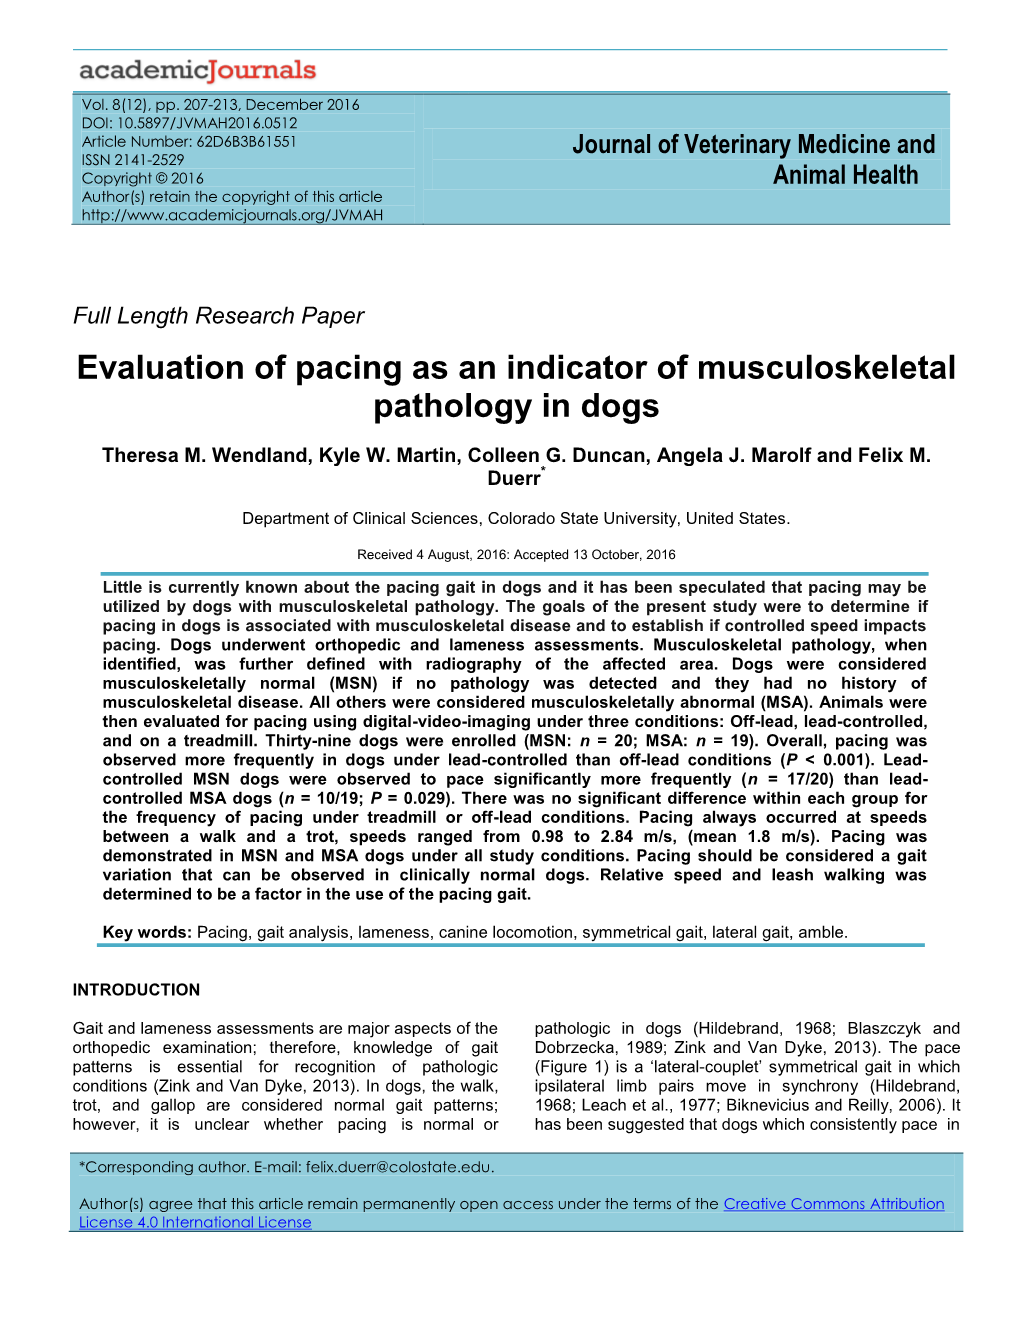 Evaluation of Pacing As an Indicator of Musculoskeletal Pathology in Dogs